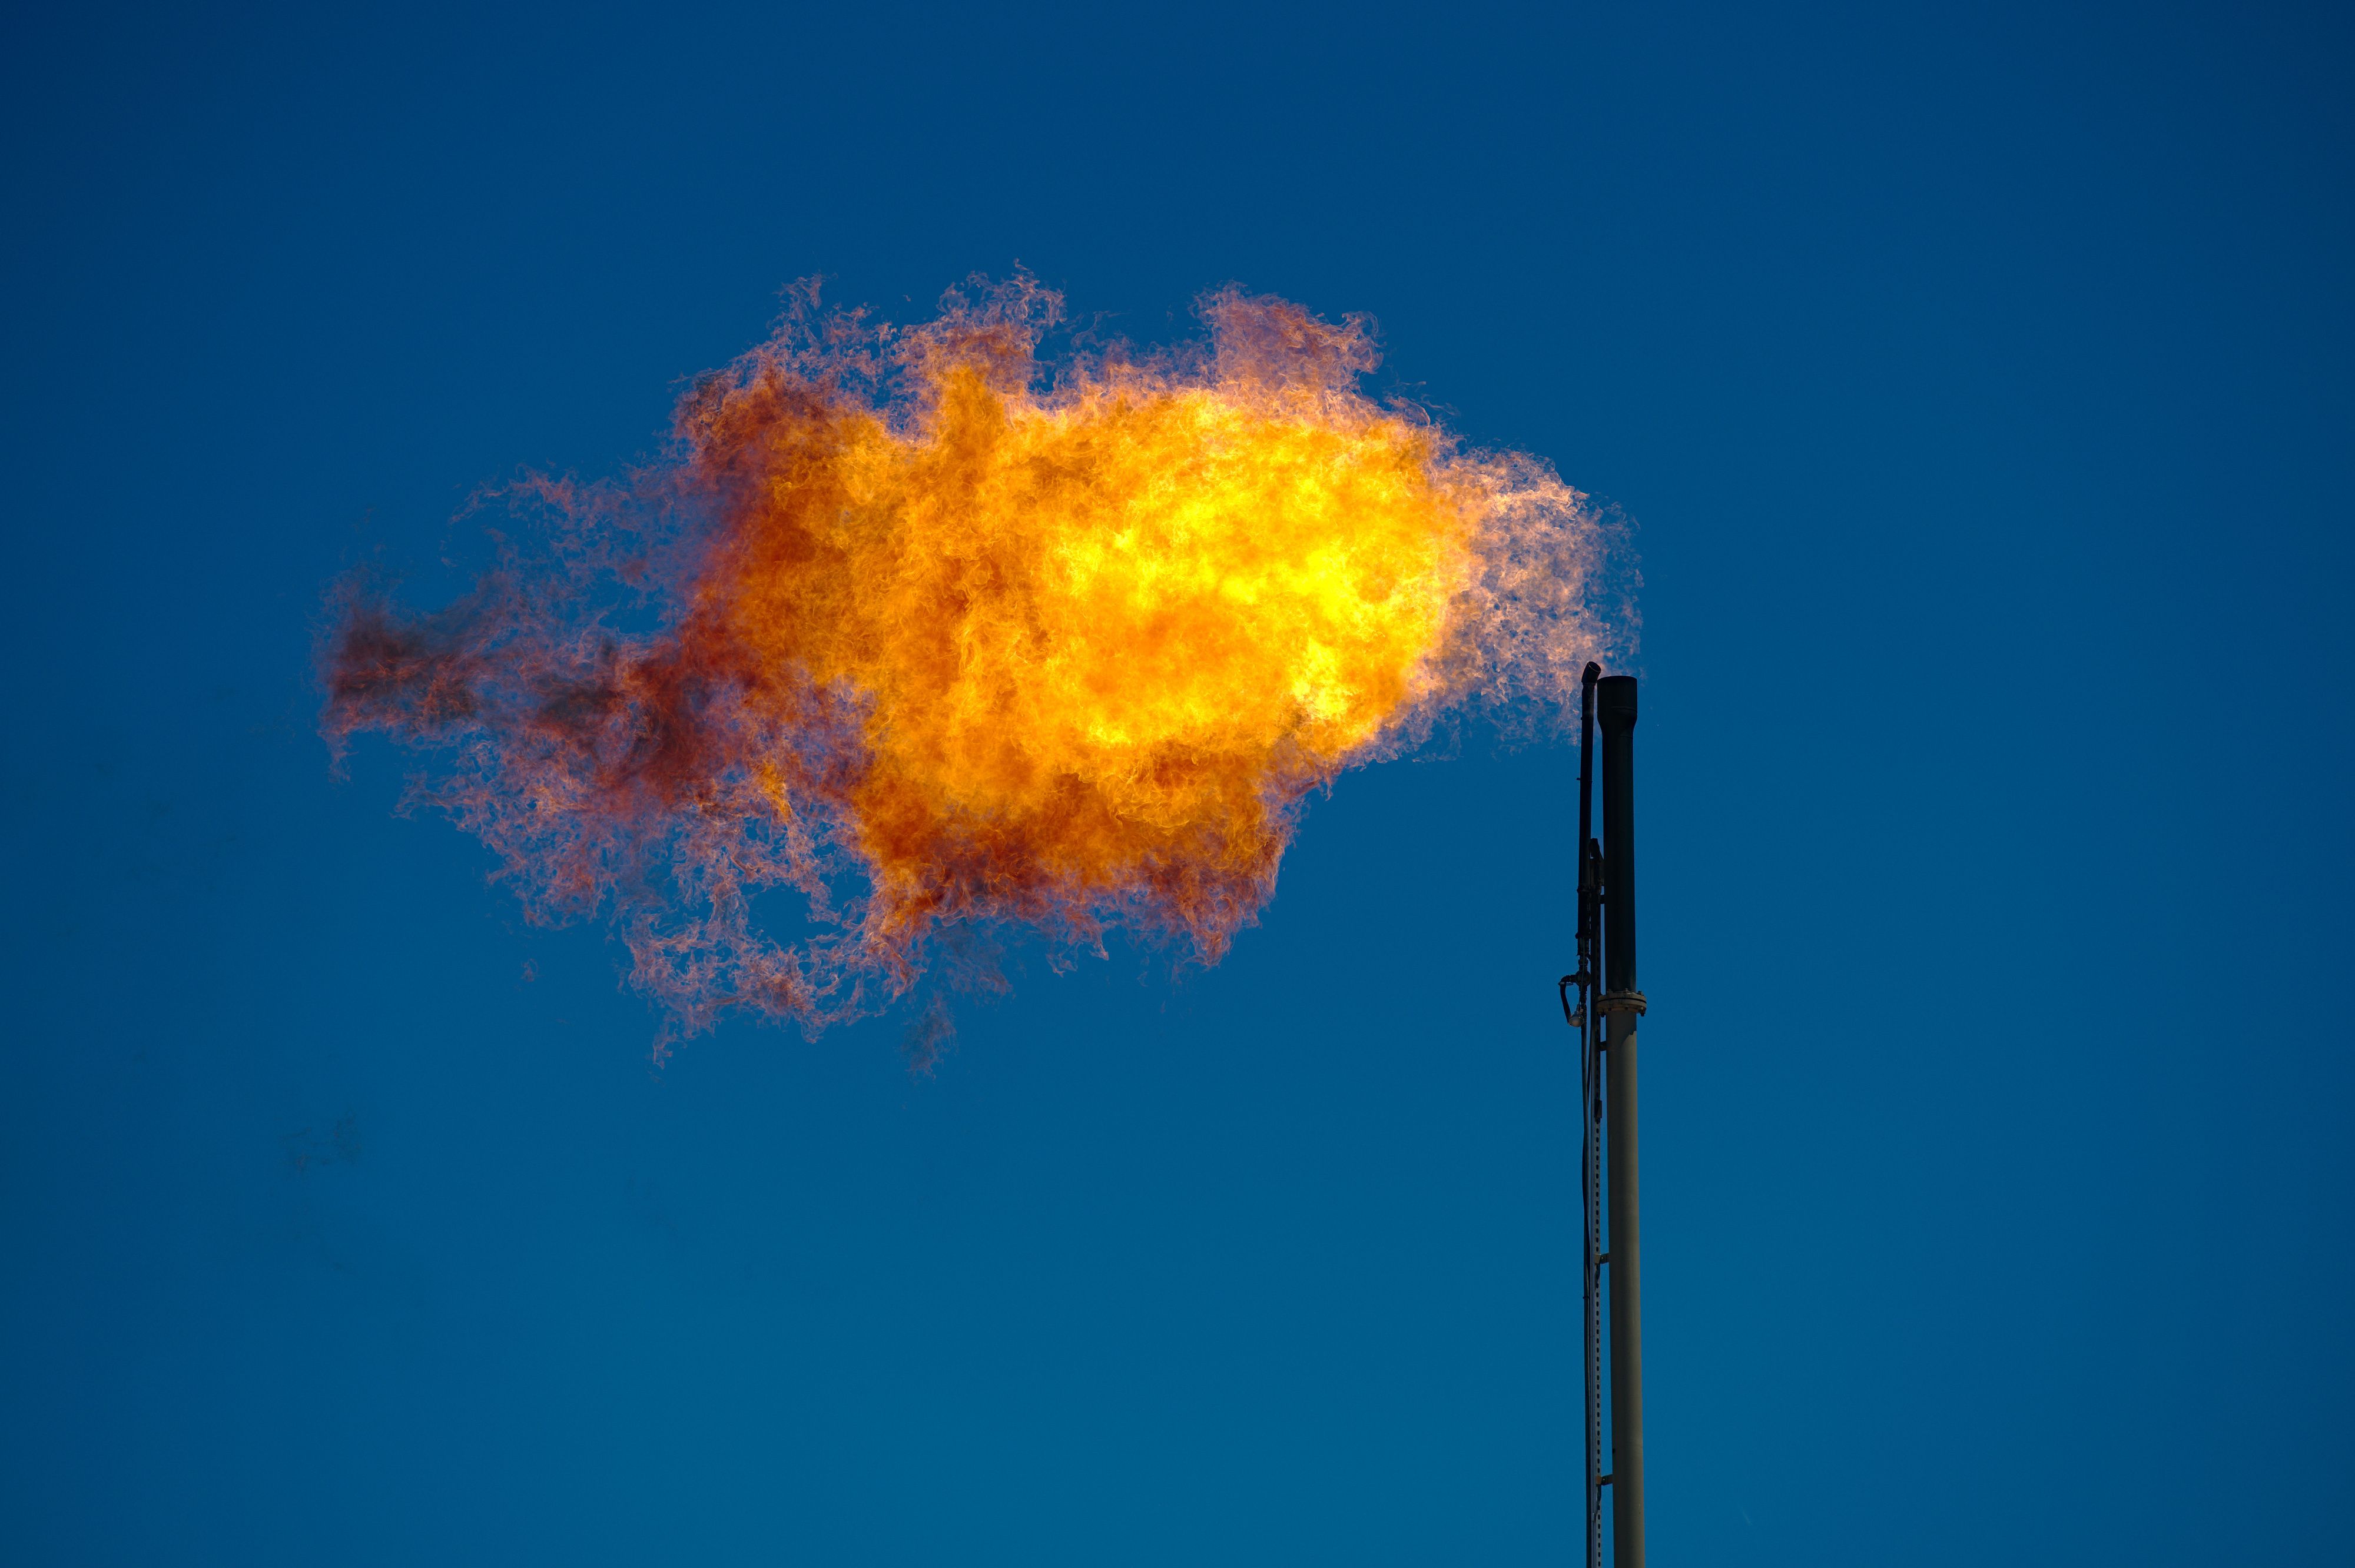 Natural gas flowing out of a dark, vertical pipe is flared, creating flames.